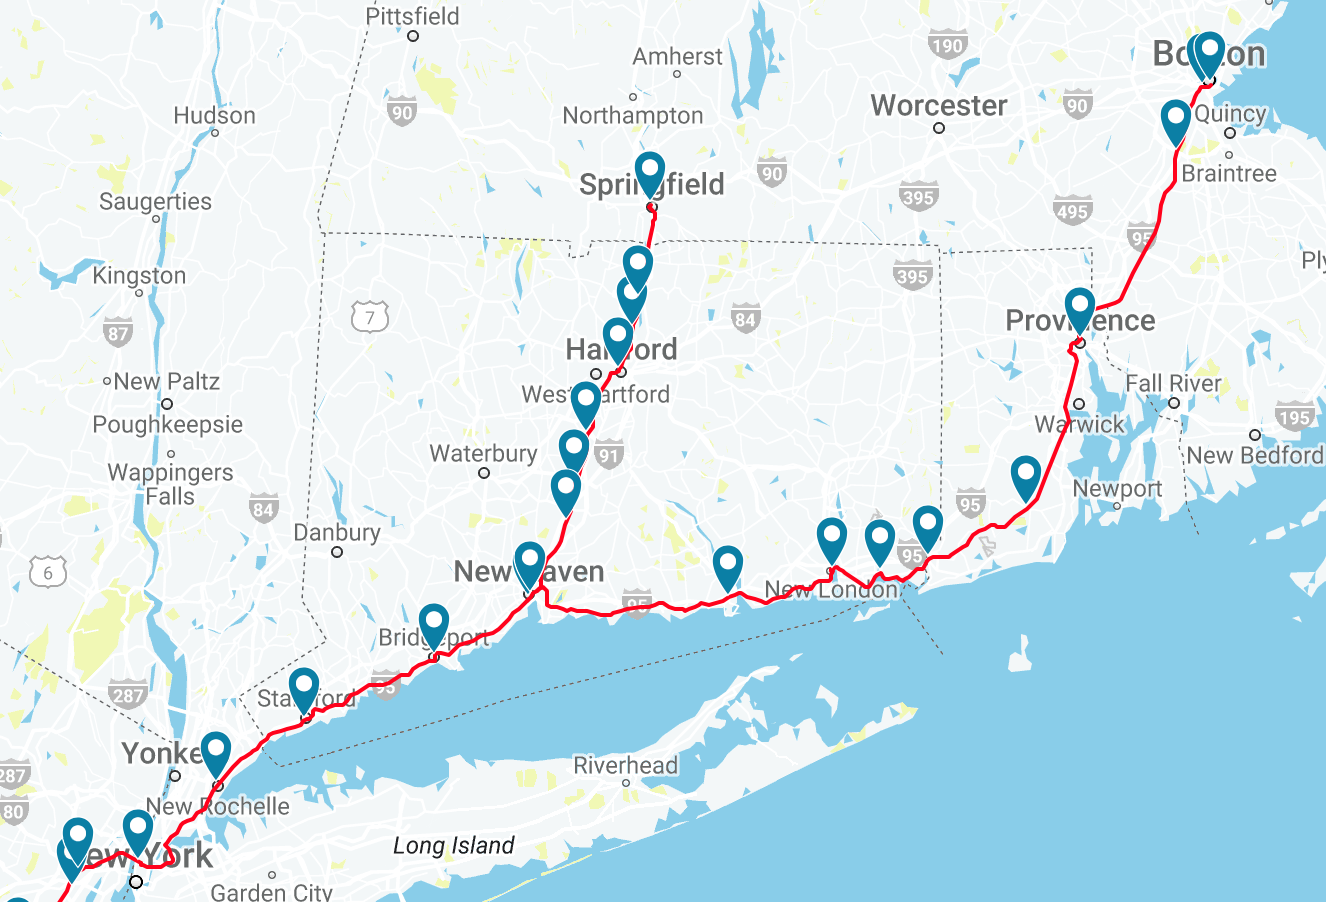 Amtrak trains in New England